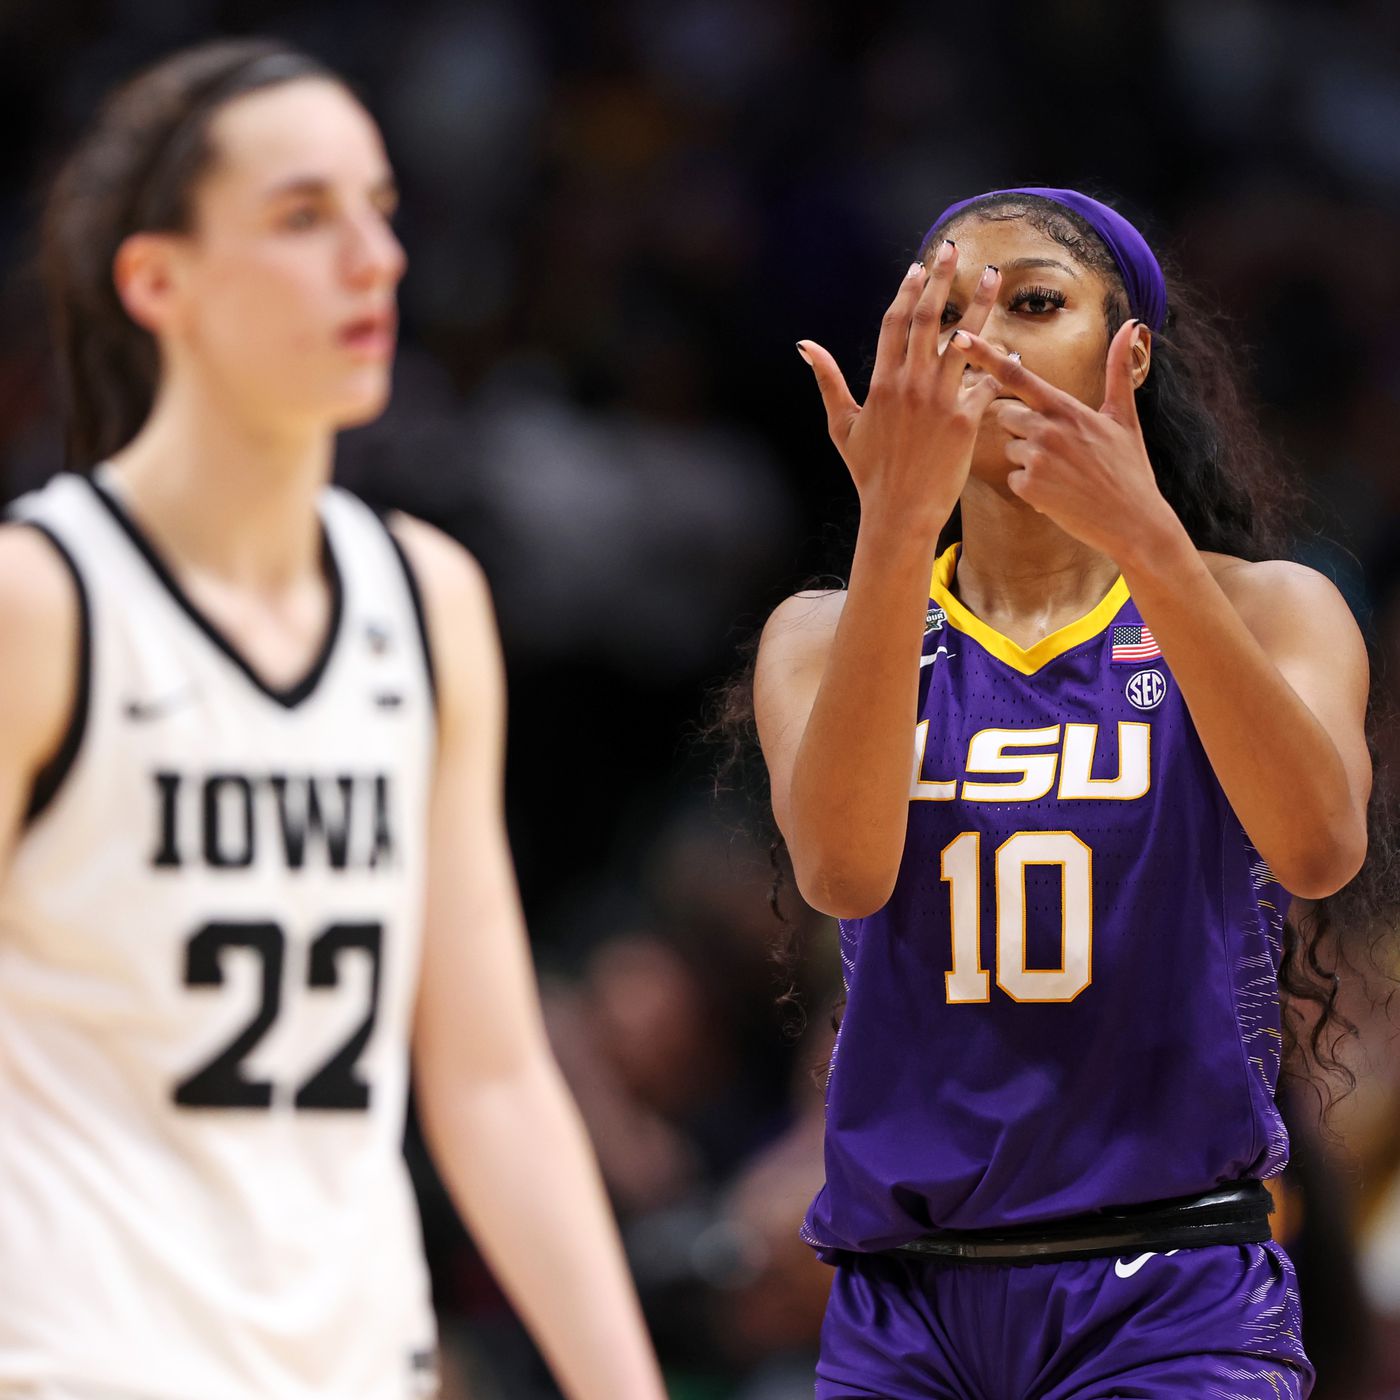 Angel Reese taunted Iowa's Caitlin Clark and exposed an NCAA double standard